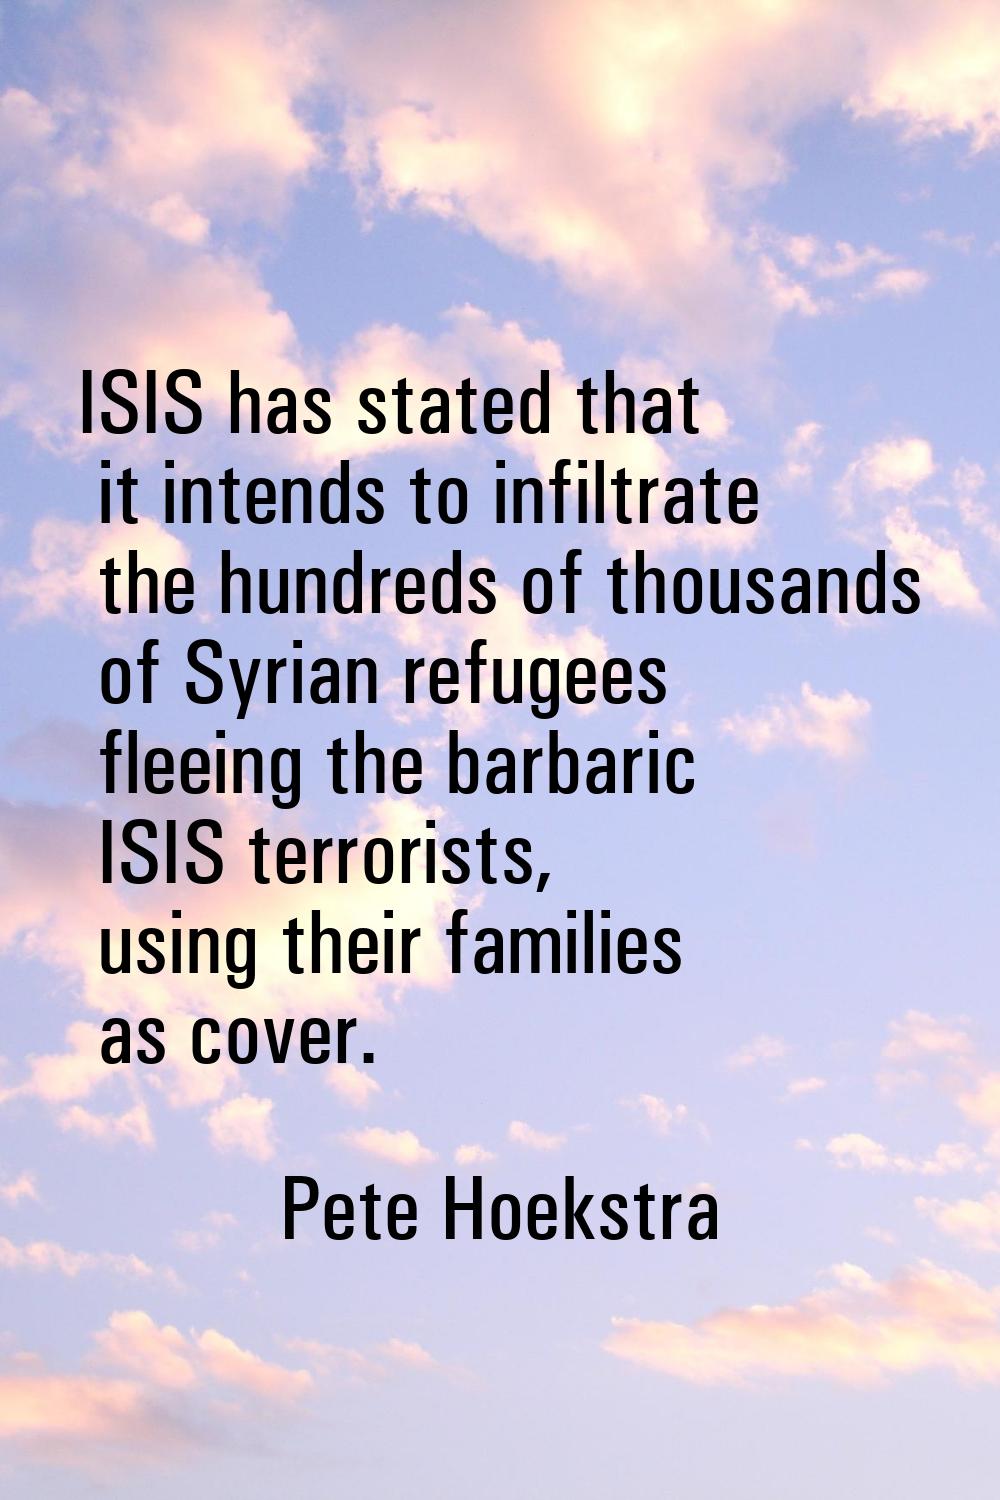 ISIS has stated that it intends to infiltrate the hundreds of thousands of Syrian refugees fleeing 